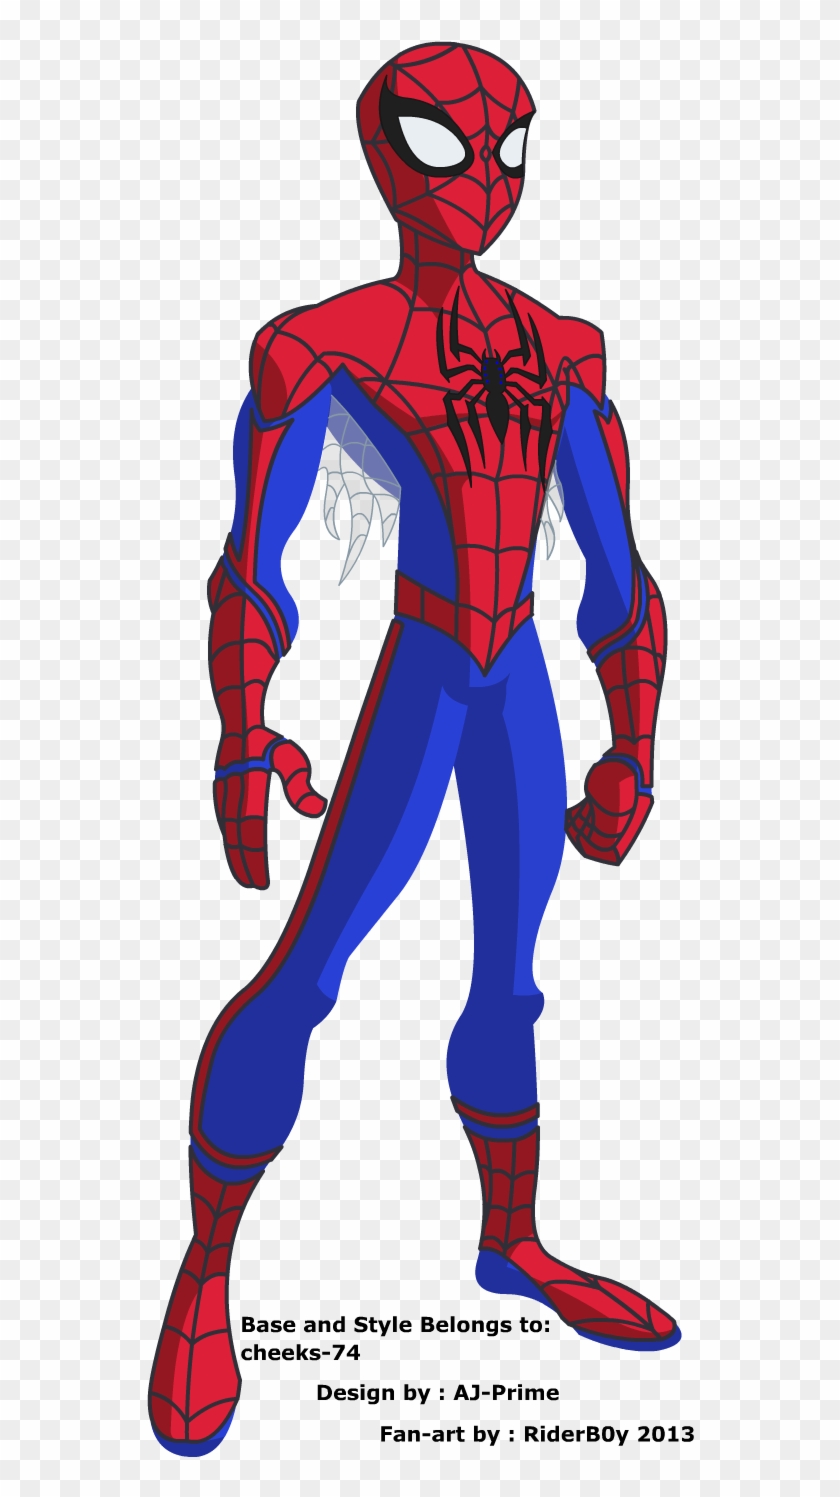 How To Draw Peter Parker Check out my heroes & villains playlist